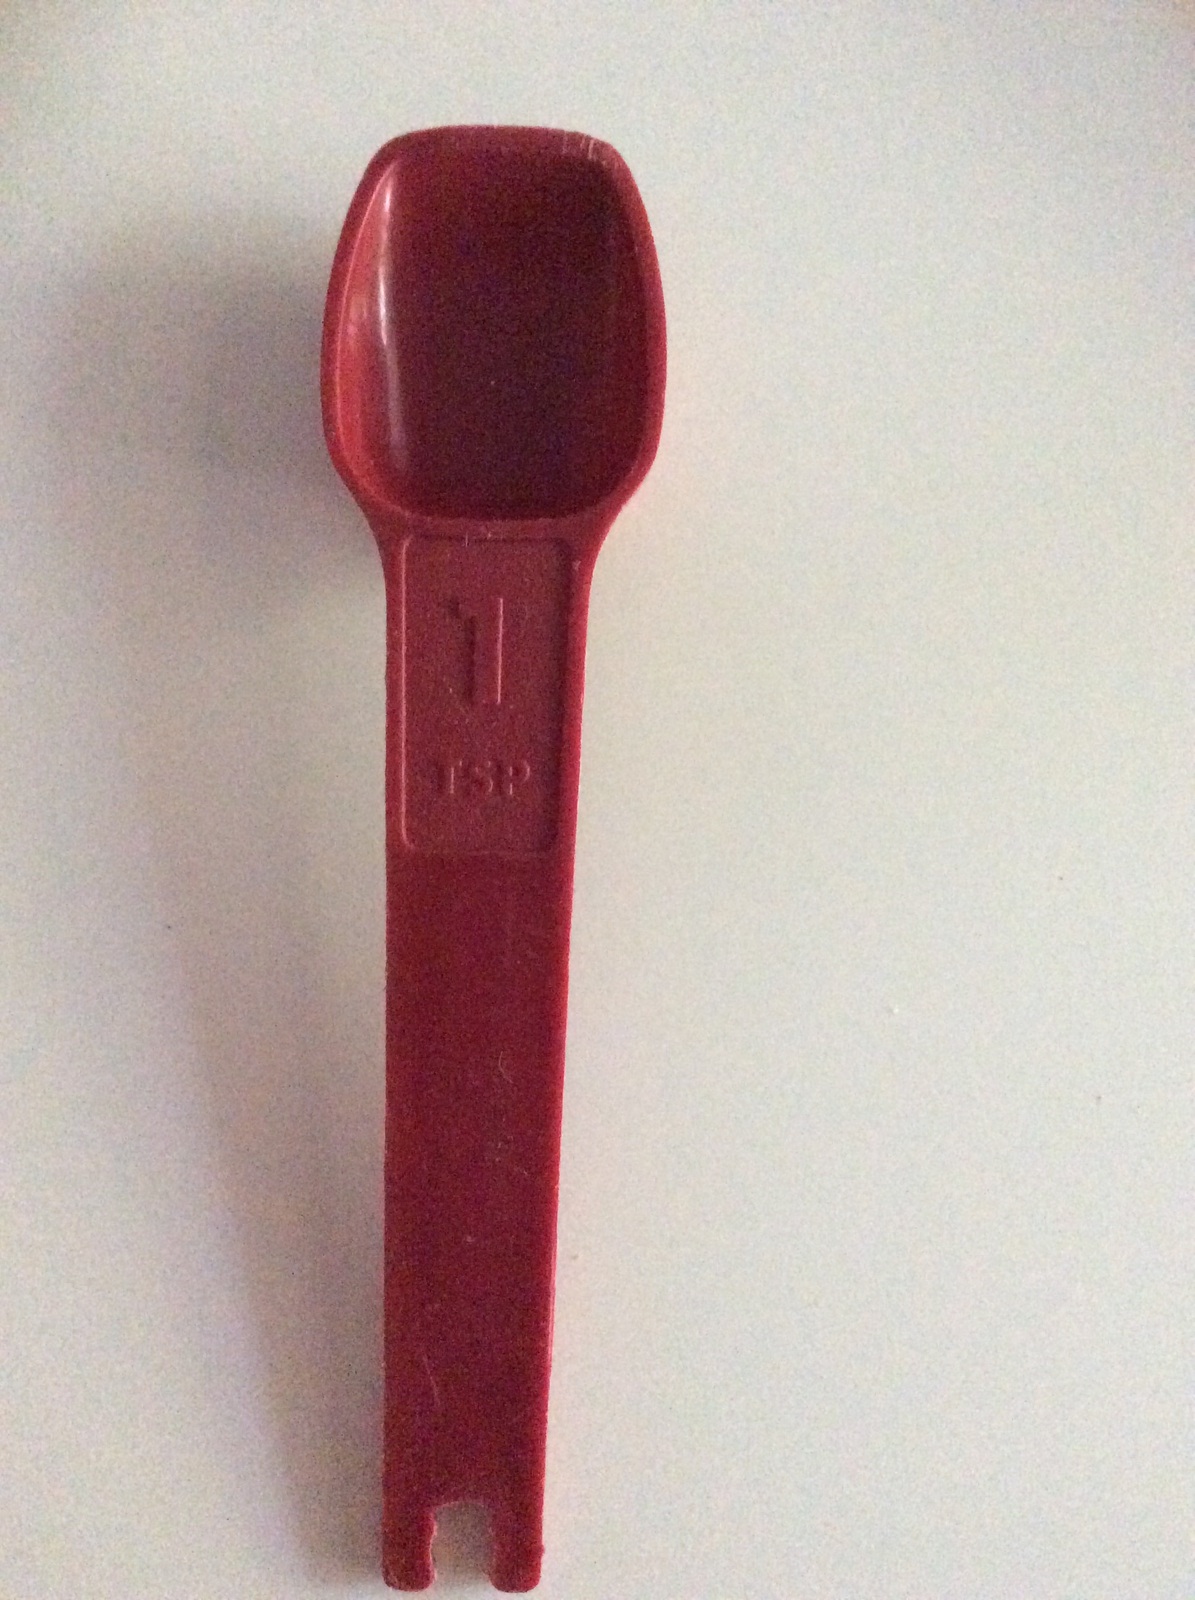 Tupperware Replacement Measuring Spoon 1 TSP Cranberry - $6.55